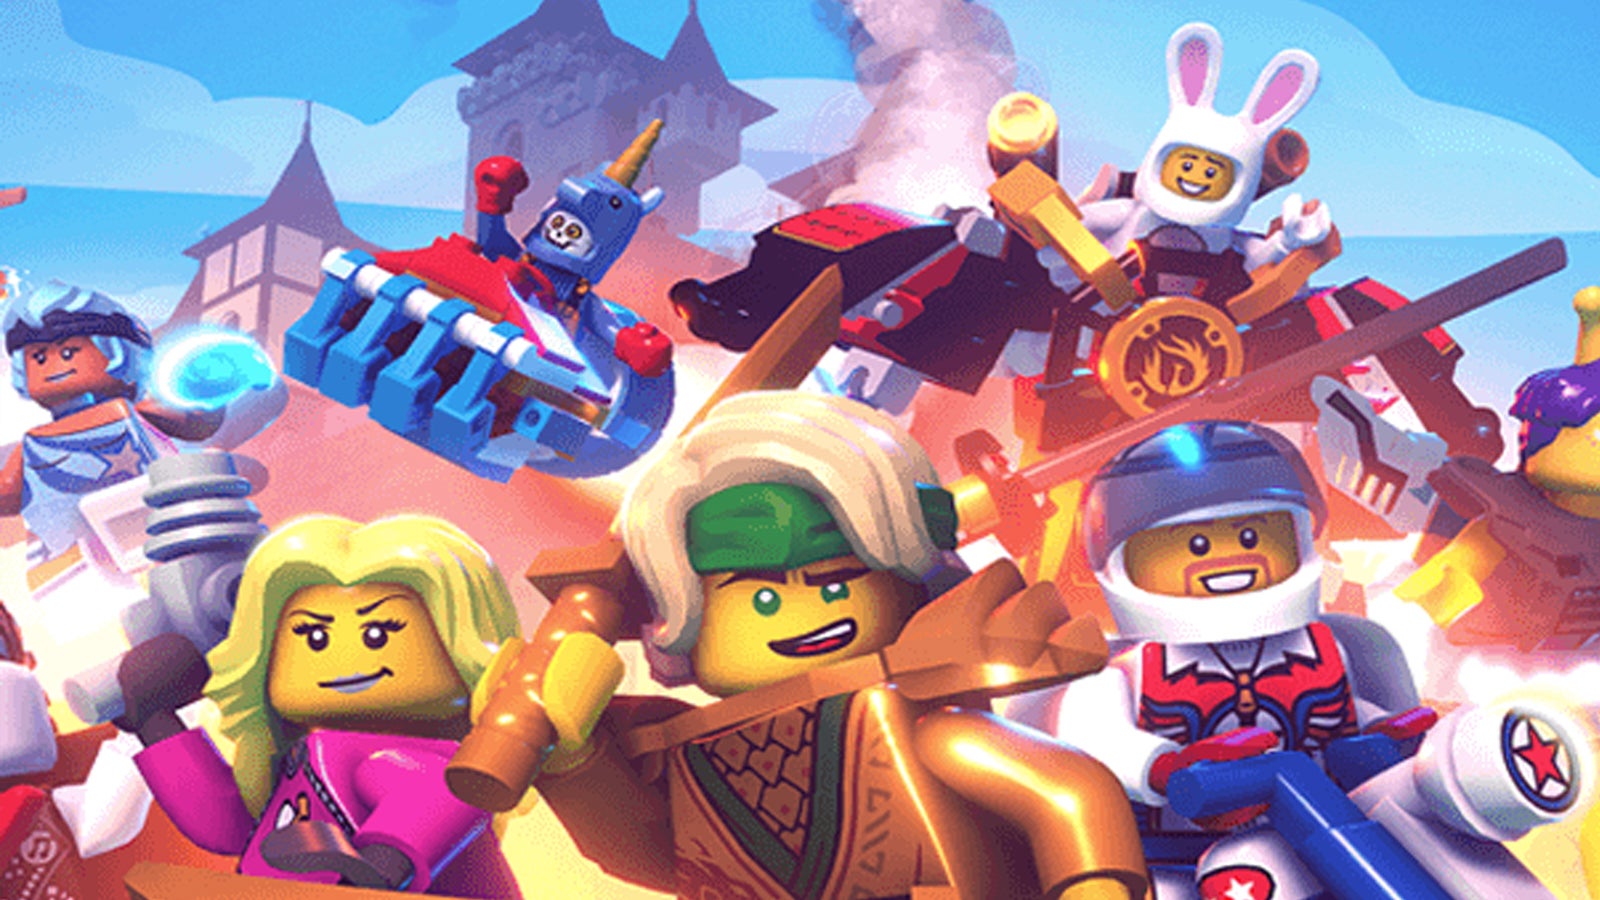 Image for Smash Bros-like Lego Brawls coming to consoles